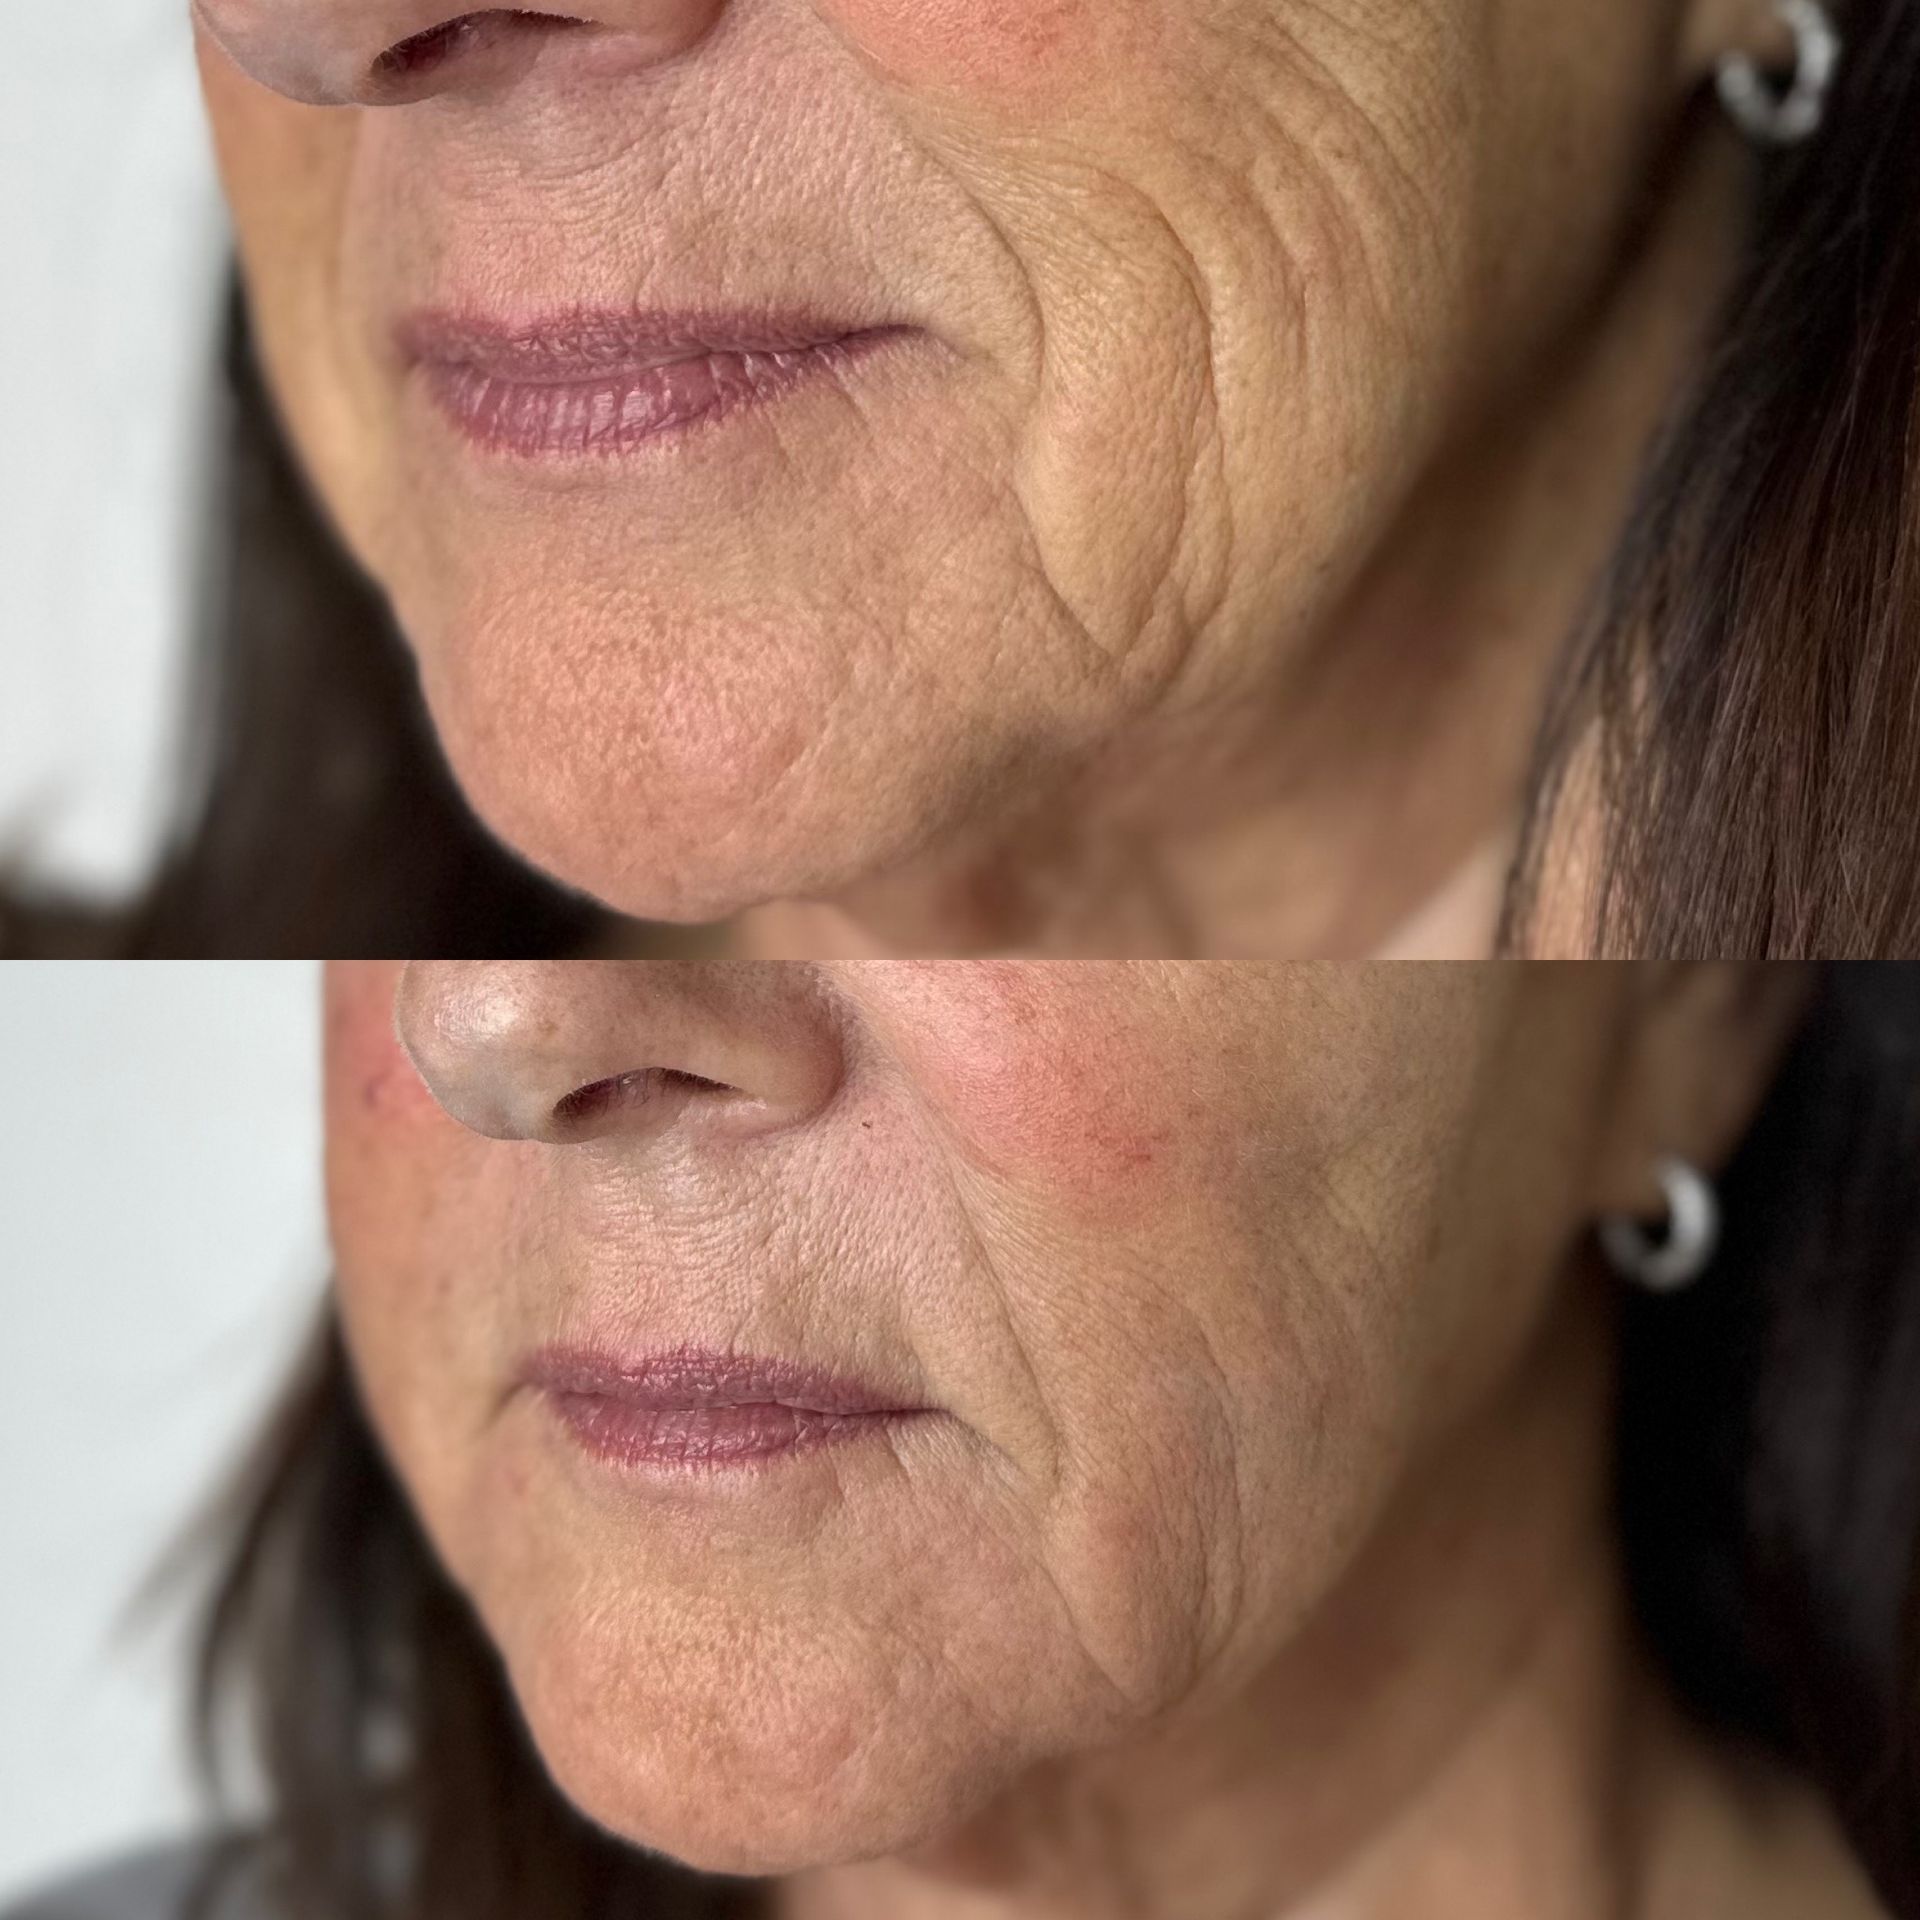 Marionette Lines filler treatment before and after results